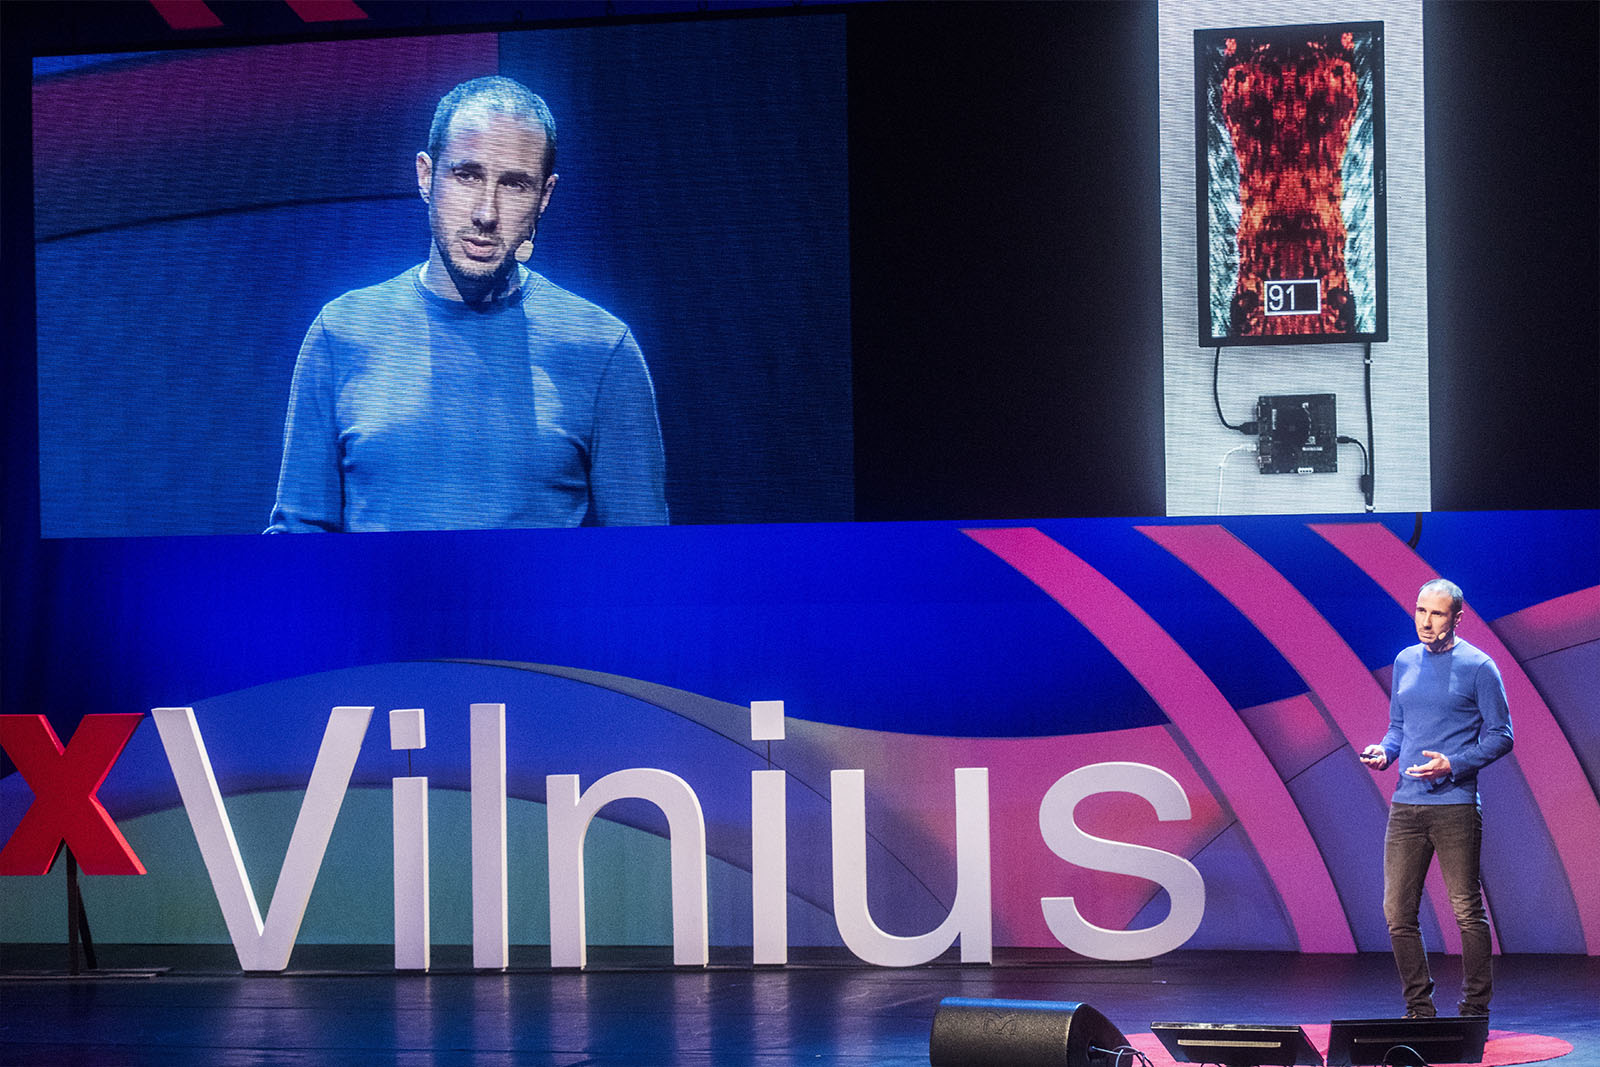 TEDxVilnius (video will be released soon)